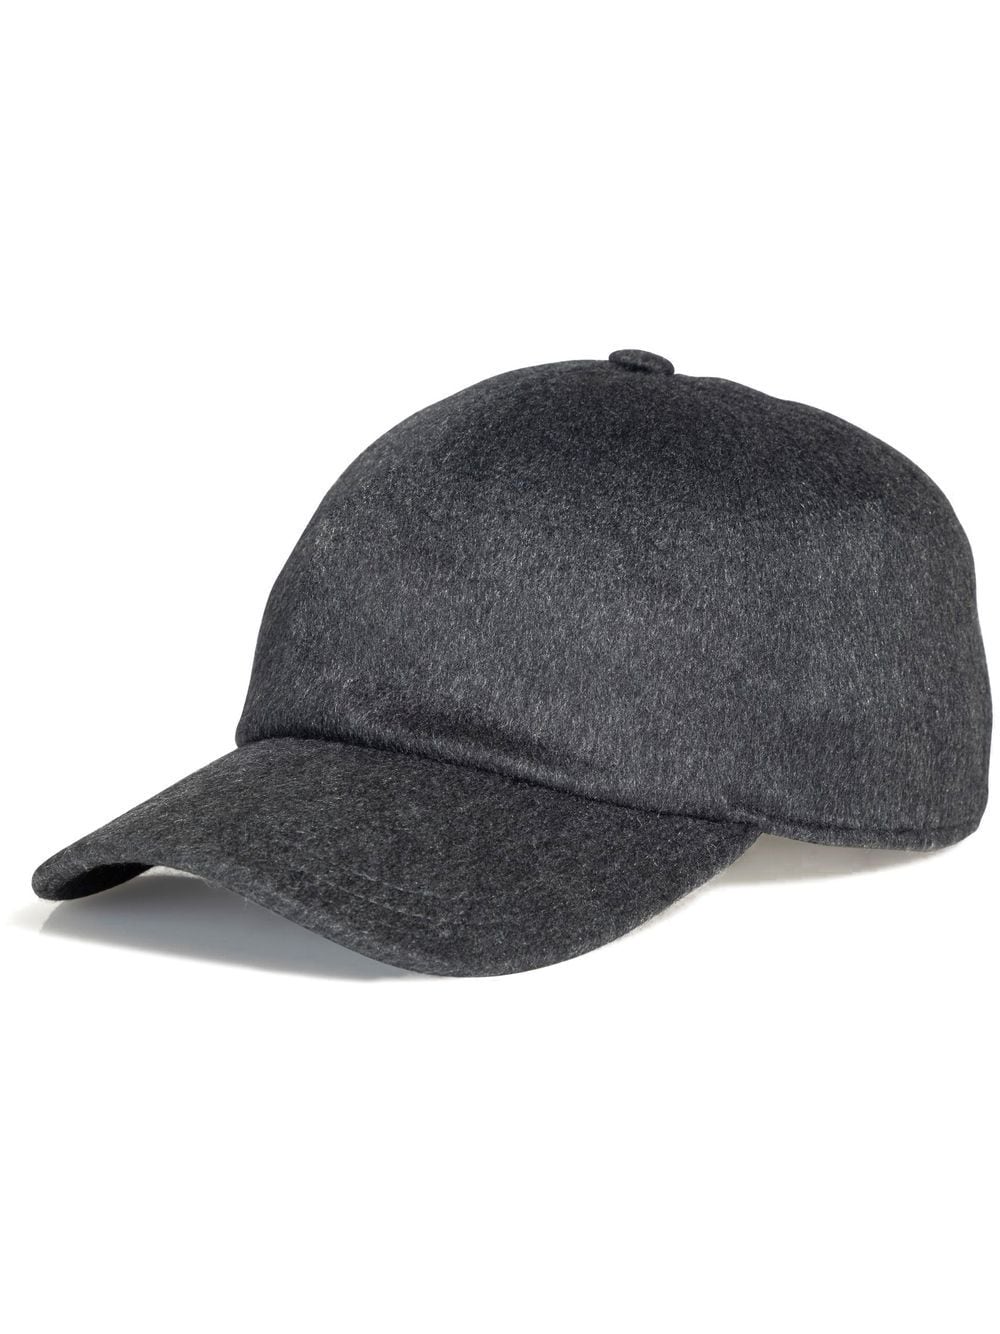 embroidered-logo cashmere cap